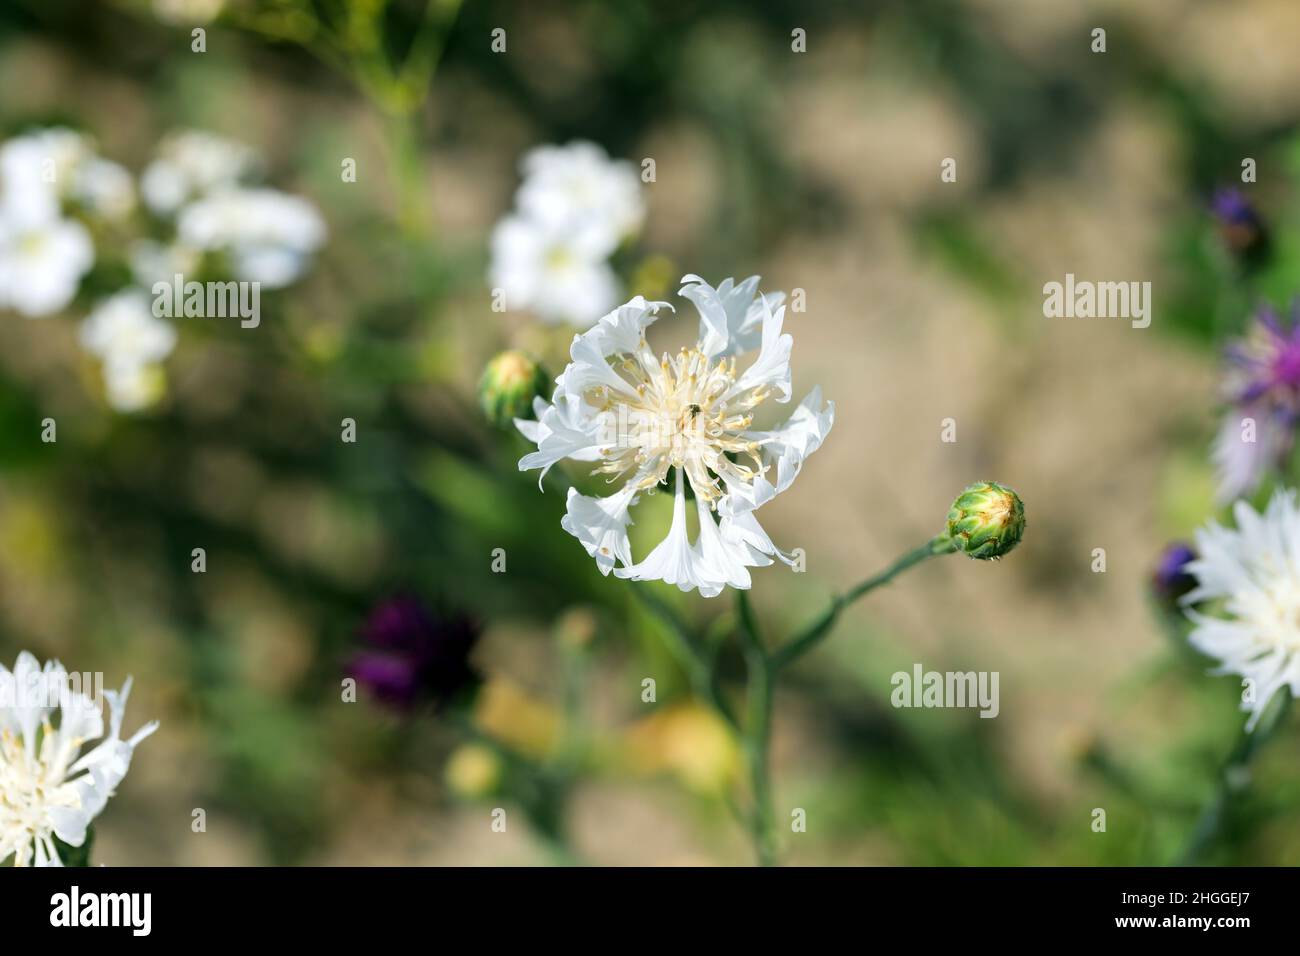 white form of Centaurea cyanus, commonly known as cornflower or bachelor's button. Widespread and common weed in agricultural and horticultural. Stock Photo